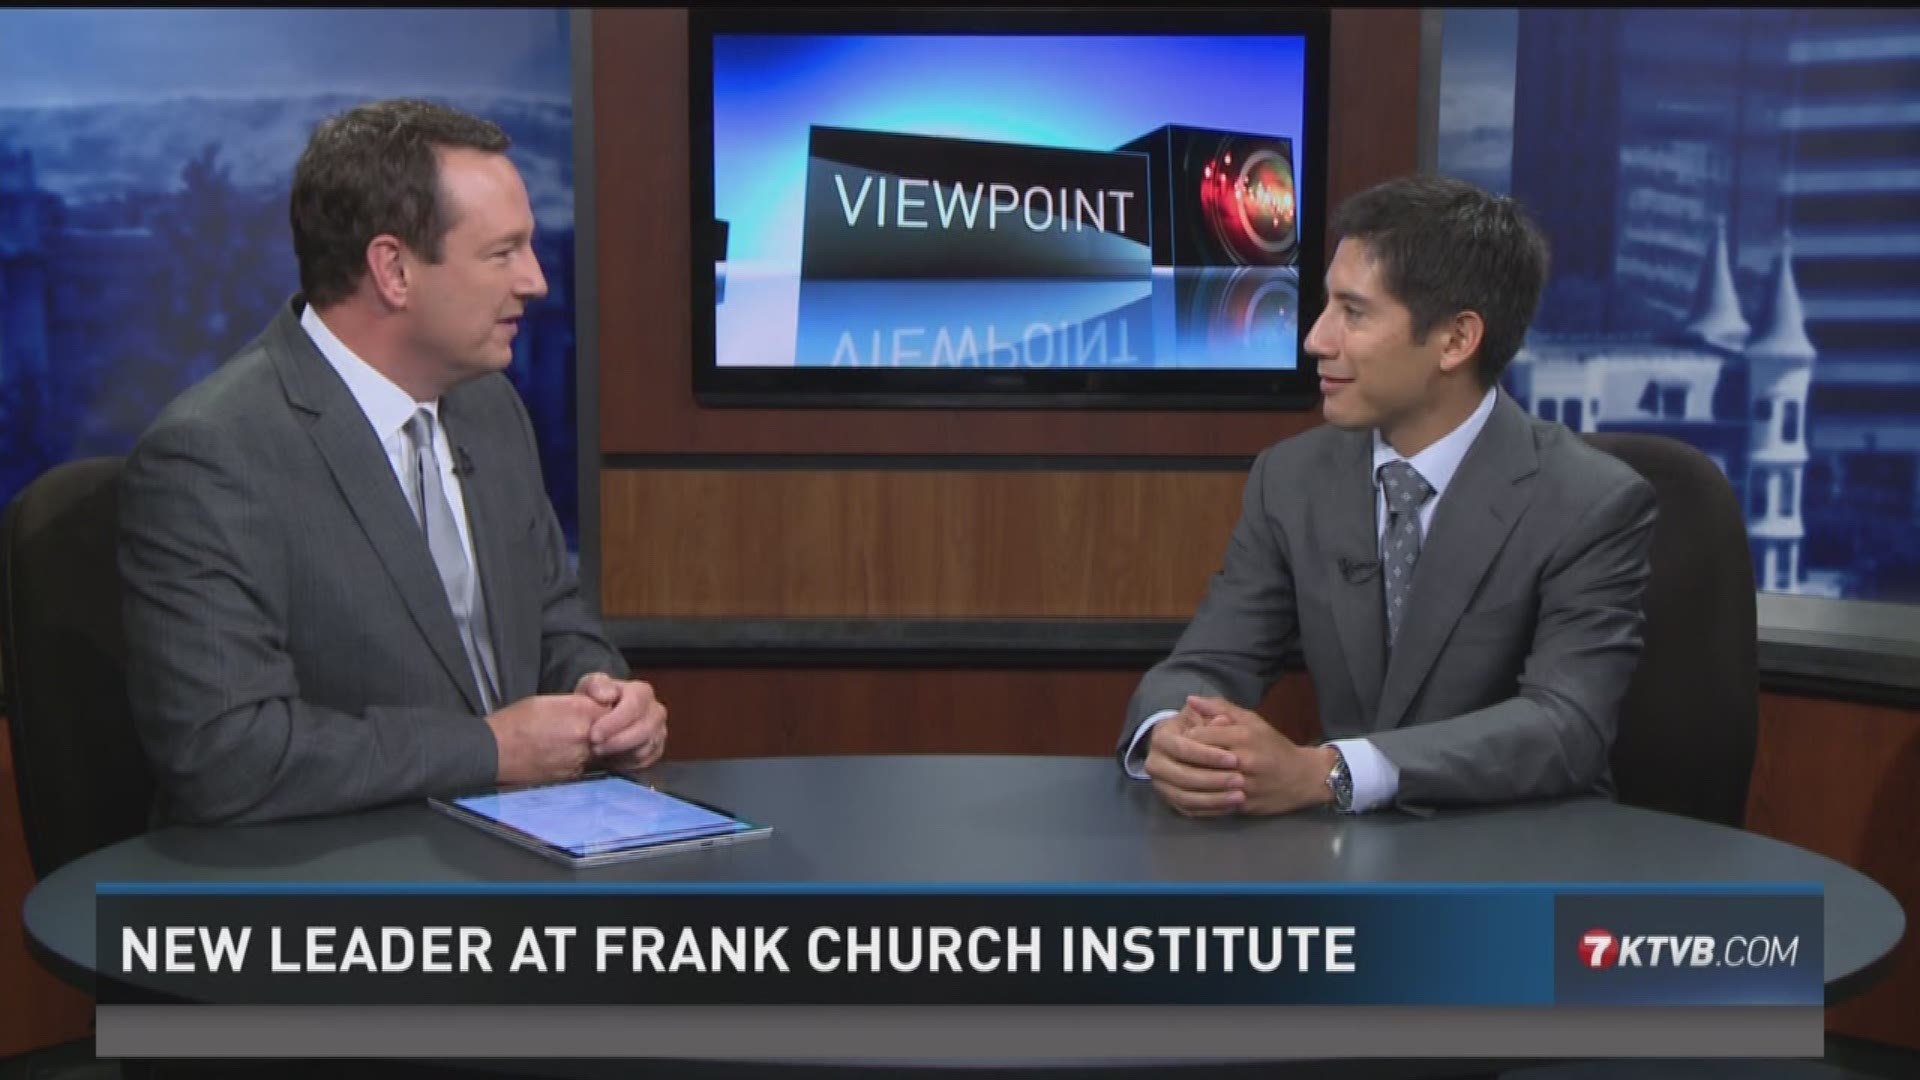 Viewpoint - New leader at Frank Church Institute.